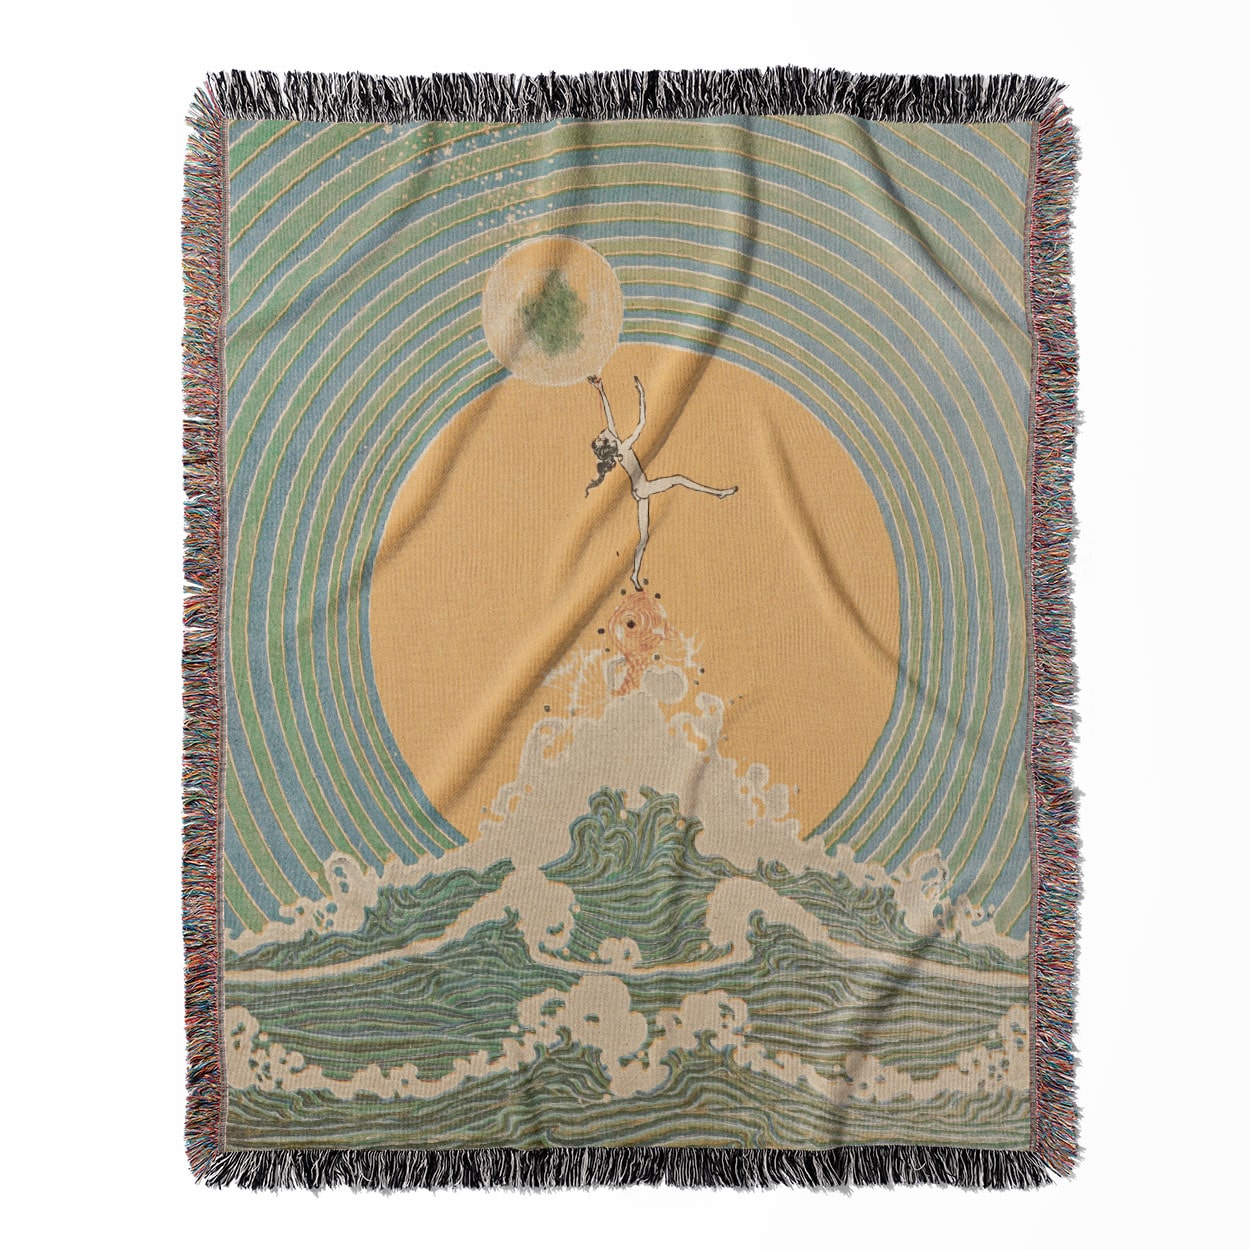 Reach for the Moon woven throw blanket, made with 100% cotton, providing a soft and cozy texture with an Art Nouveau drawing for home decor.